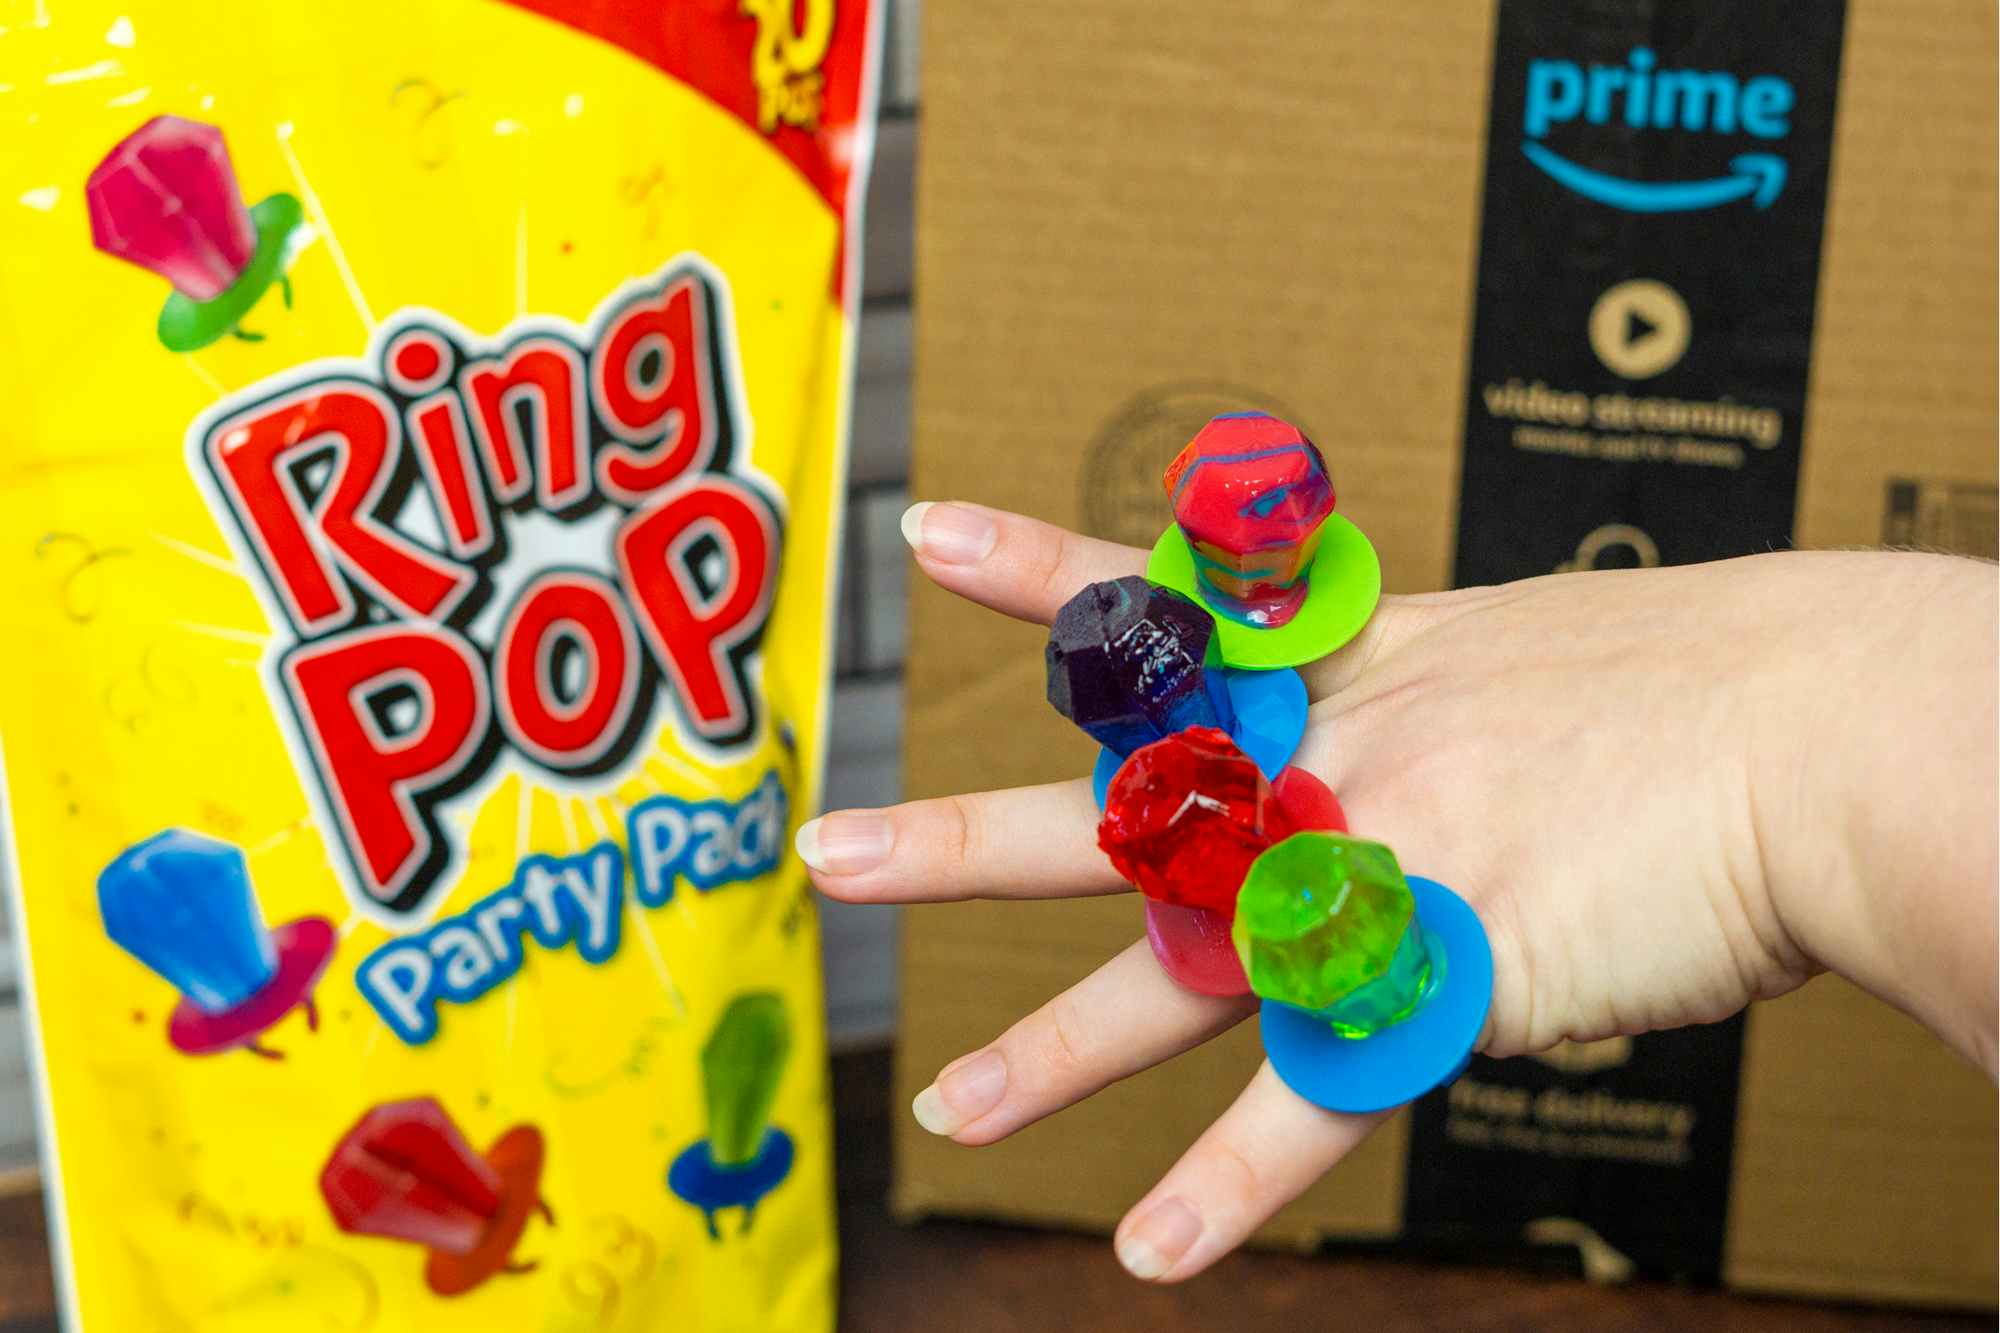 someone holding up their hand, a ring pop on each finger, in front of the Ring Pop party pack bag and an amazon prime box